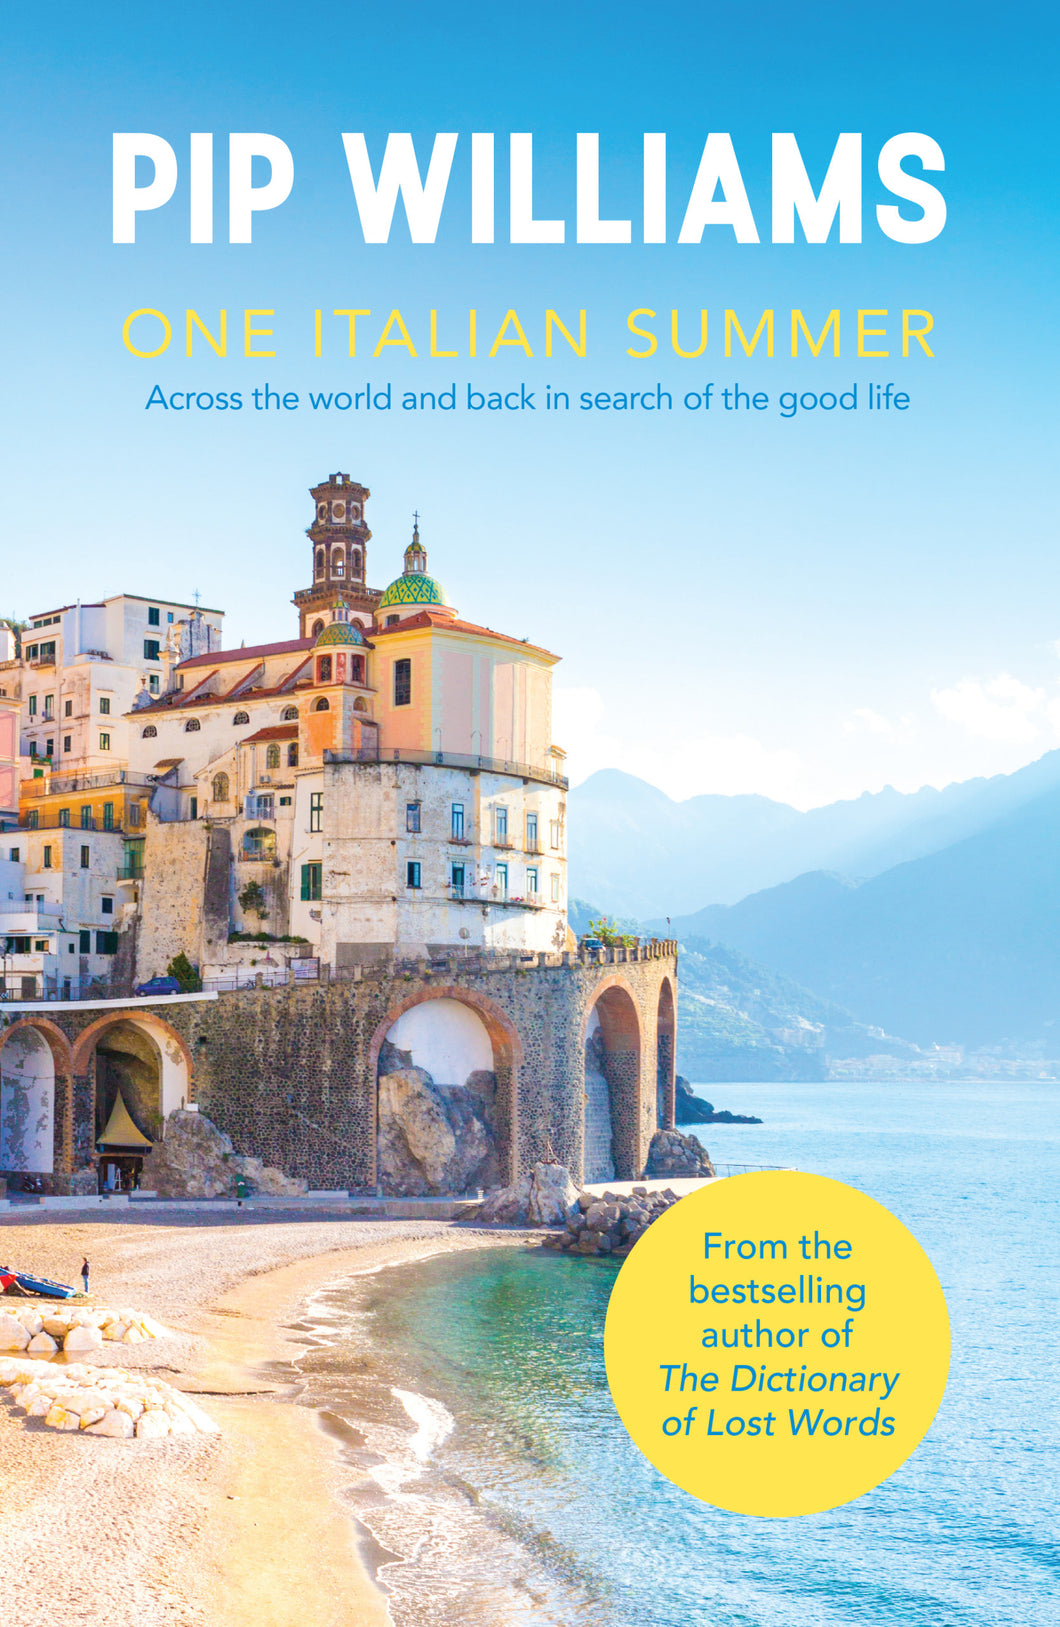 One Italian Summer by Pip Williams